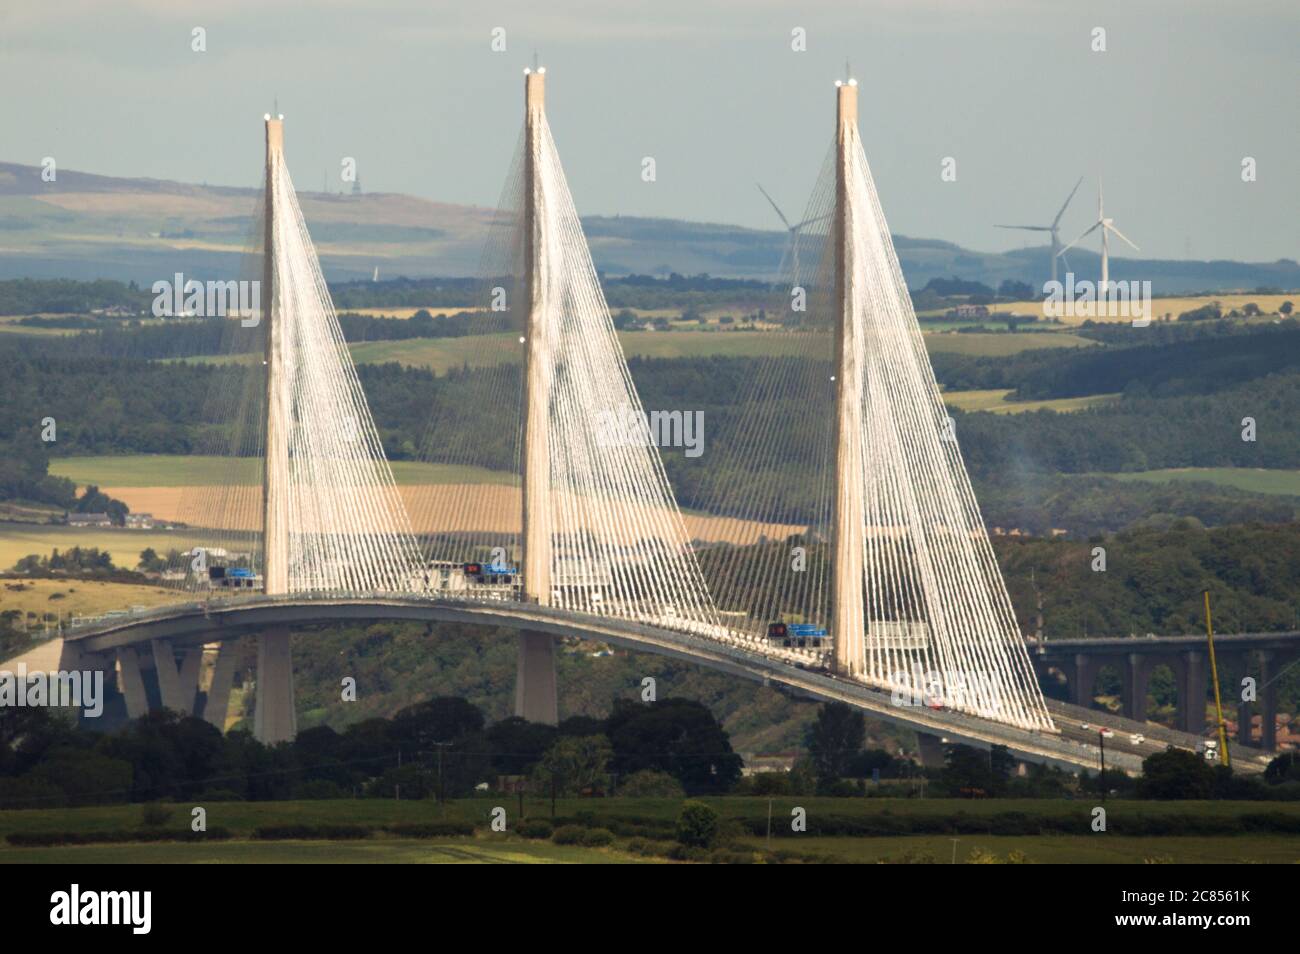 Edinburgh, Scotland, UK. 21st July, 2020. Pictured: The Queensferry Crossing is a road bridge in Scotland. It was built alongside the existing Forth Road Bridge and carries the M90 motorway across the Firth of Forth between Edinburgh, at South Queensferry, and Fife, at North Queensferry. Credit: Colin Fisher/Alamy Live News Stock Photo